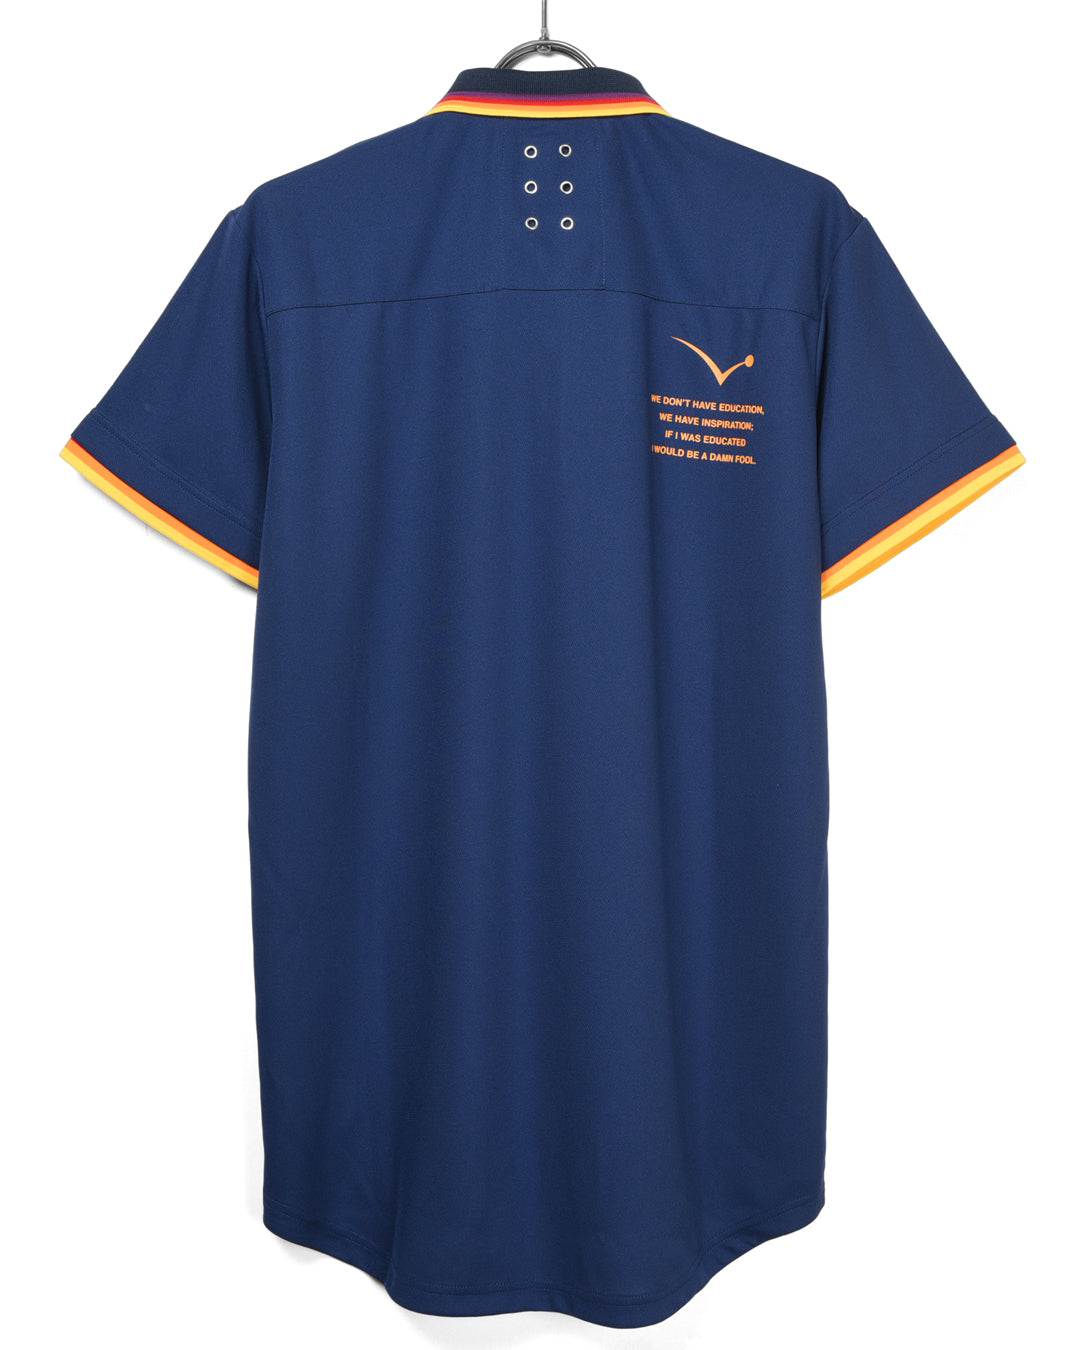 Lucha coat of arms polo